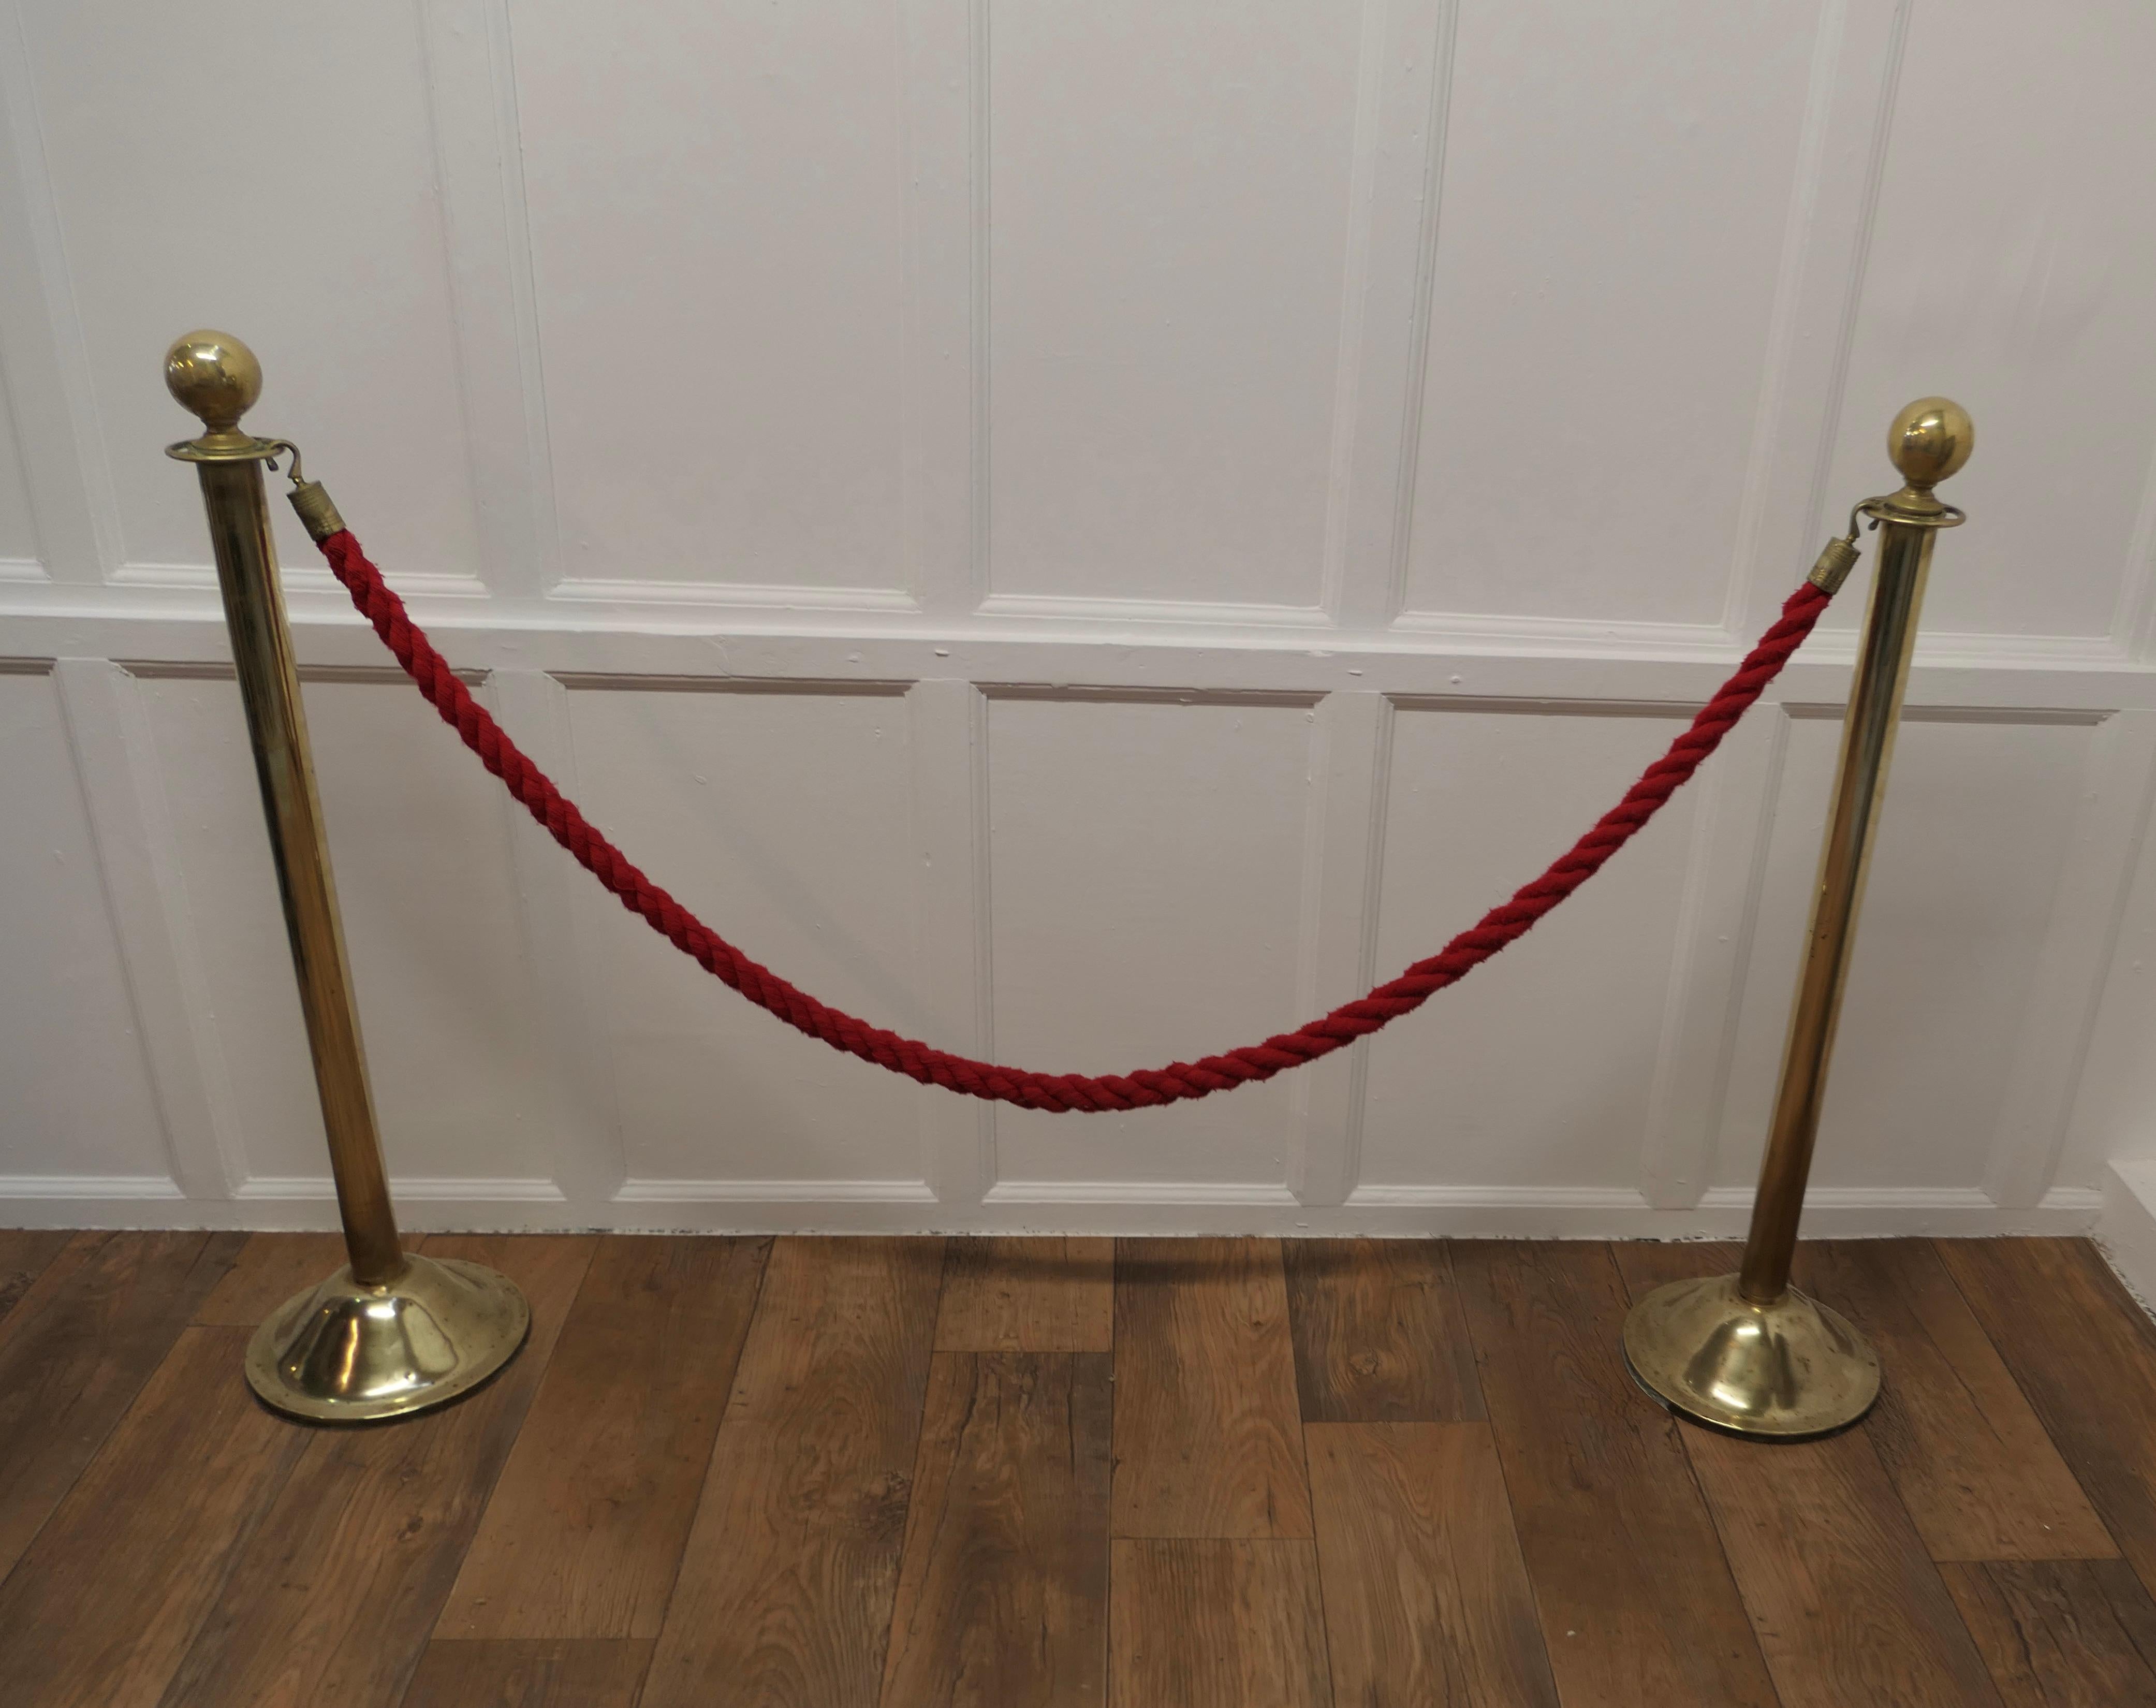 Brass and Red Rope Barrier 

A useful piece from an Old Theatre, the barrier is 2 brass columns with a red rope to joining them

The posts are 42” high and 11” in diameter at the bottom, the rope is 80” long overall

TMS35.